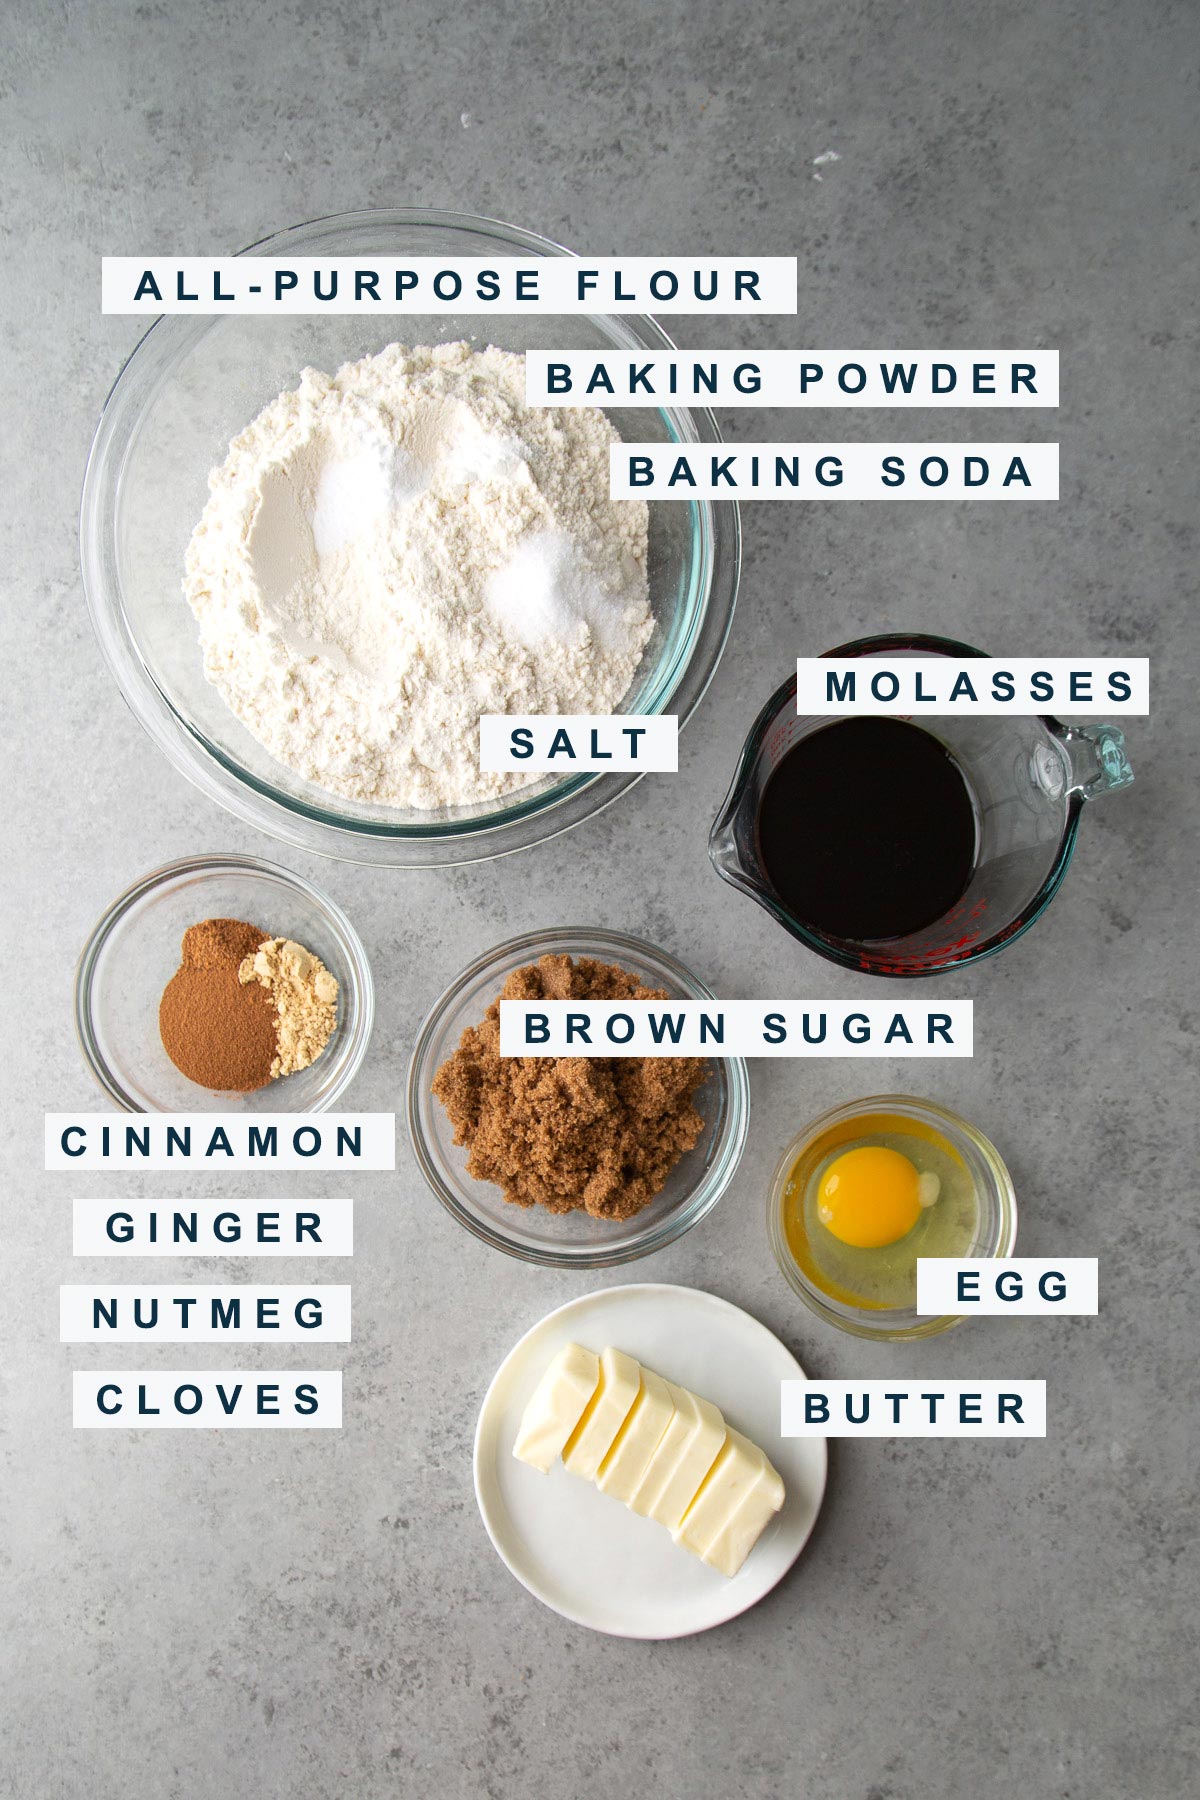 key ingredients for gingerbread cookie dough include flour, molasses, spices, and brown sugar.